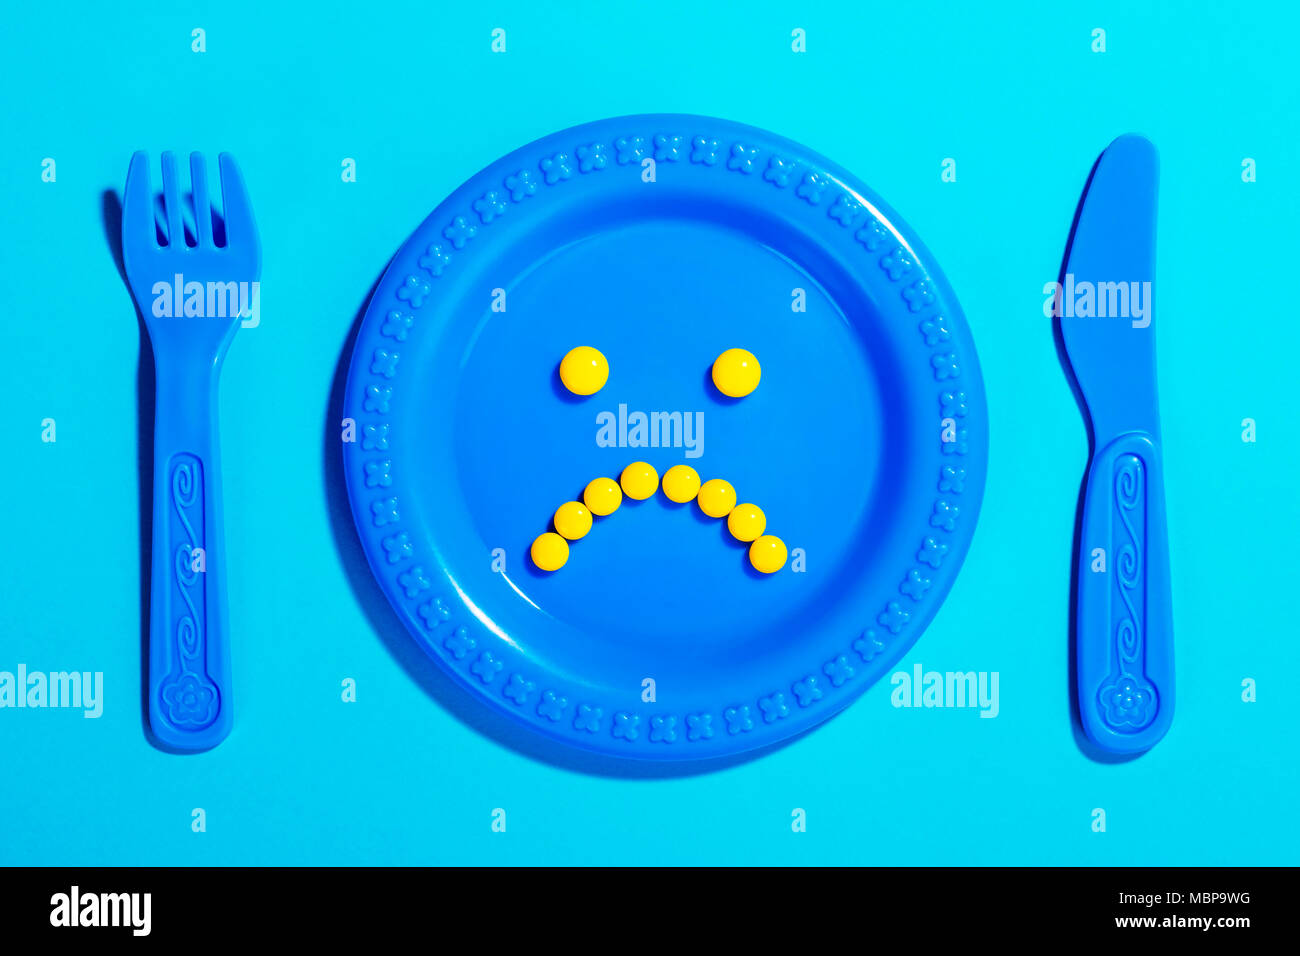 Unhappy face made of yellow pills on children’s plate and cutlery toy. Stock Photo